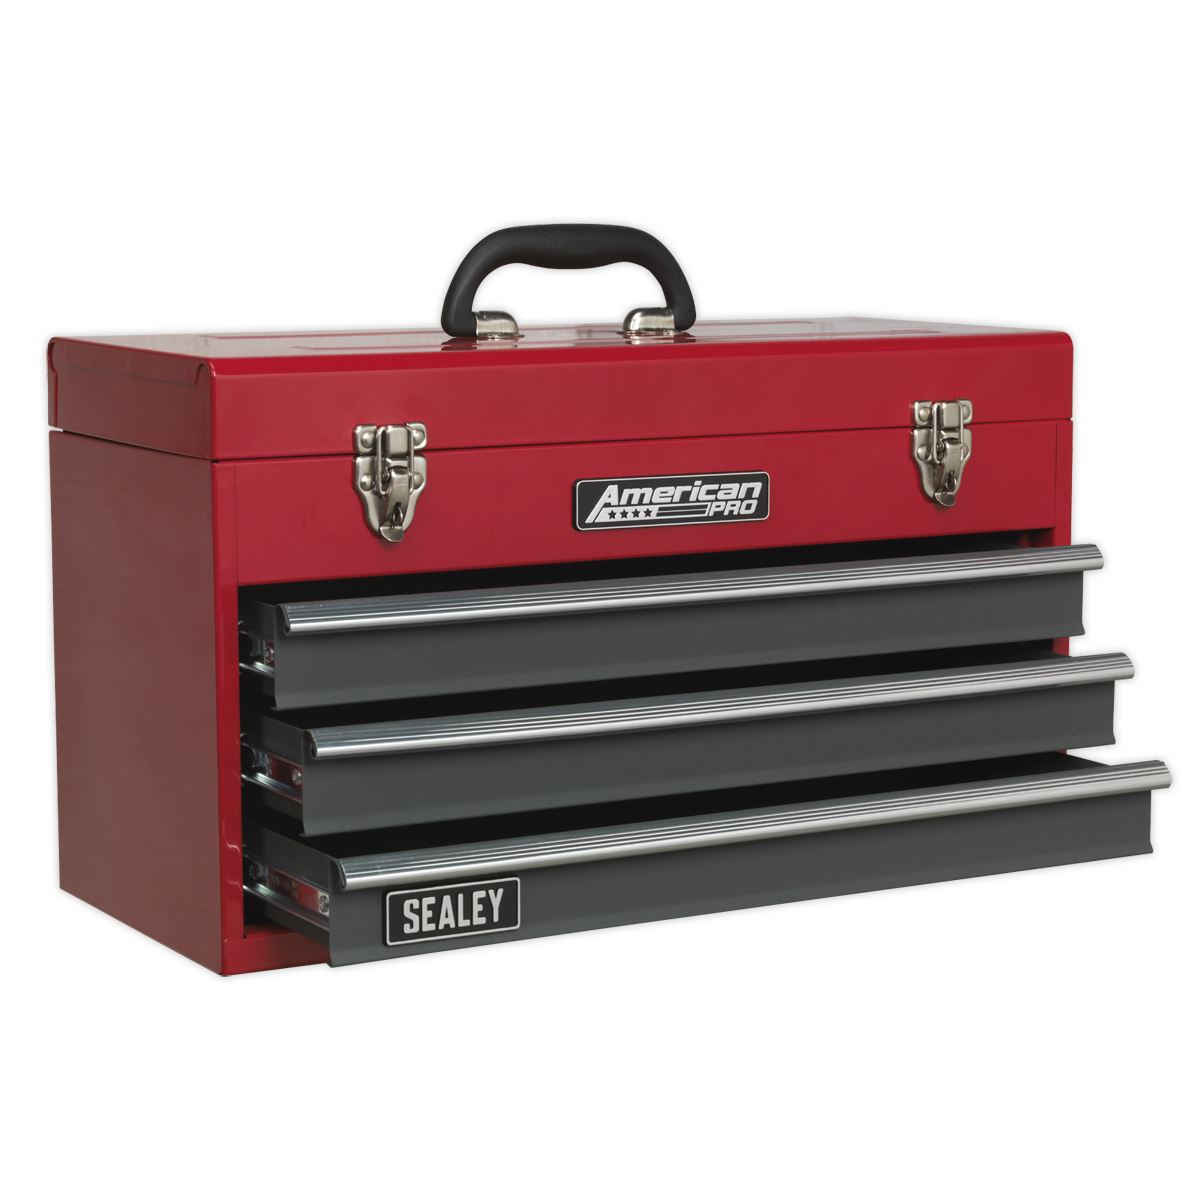 Sealey American Pro Tool Chest 3 Drawer Portable with Ball-Bearing Slides - Red/Grey